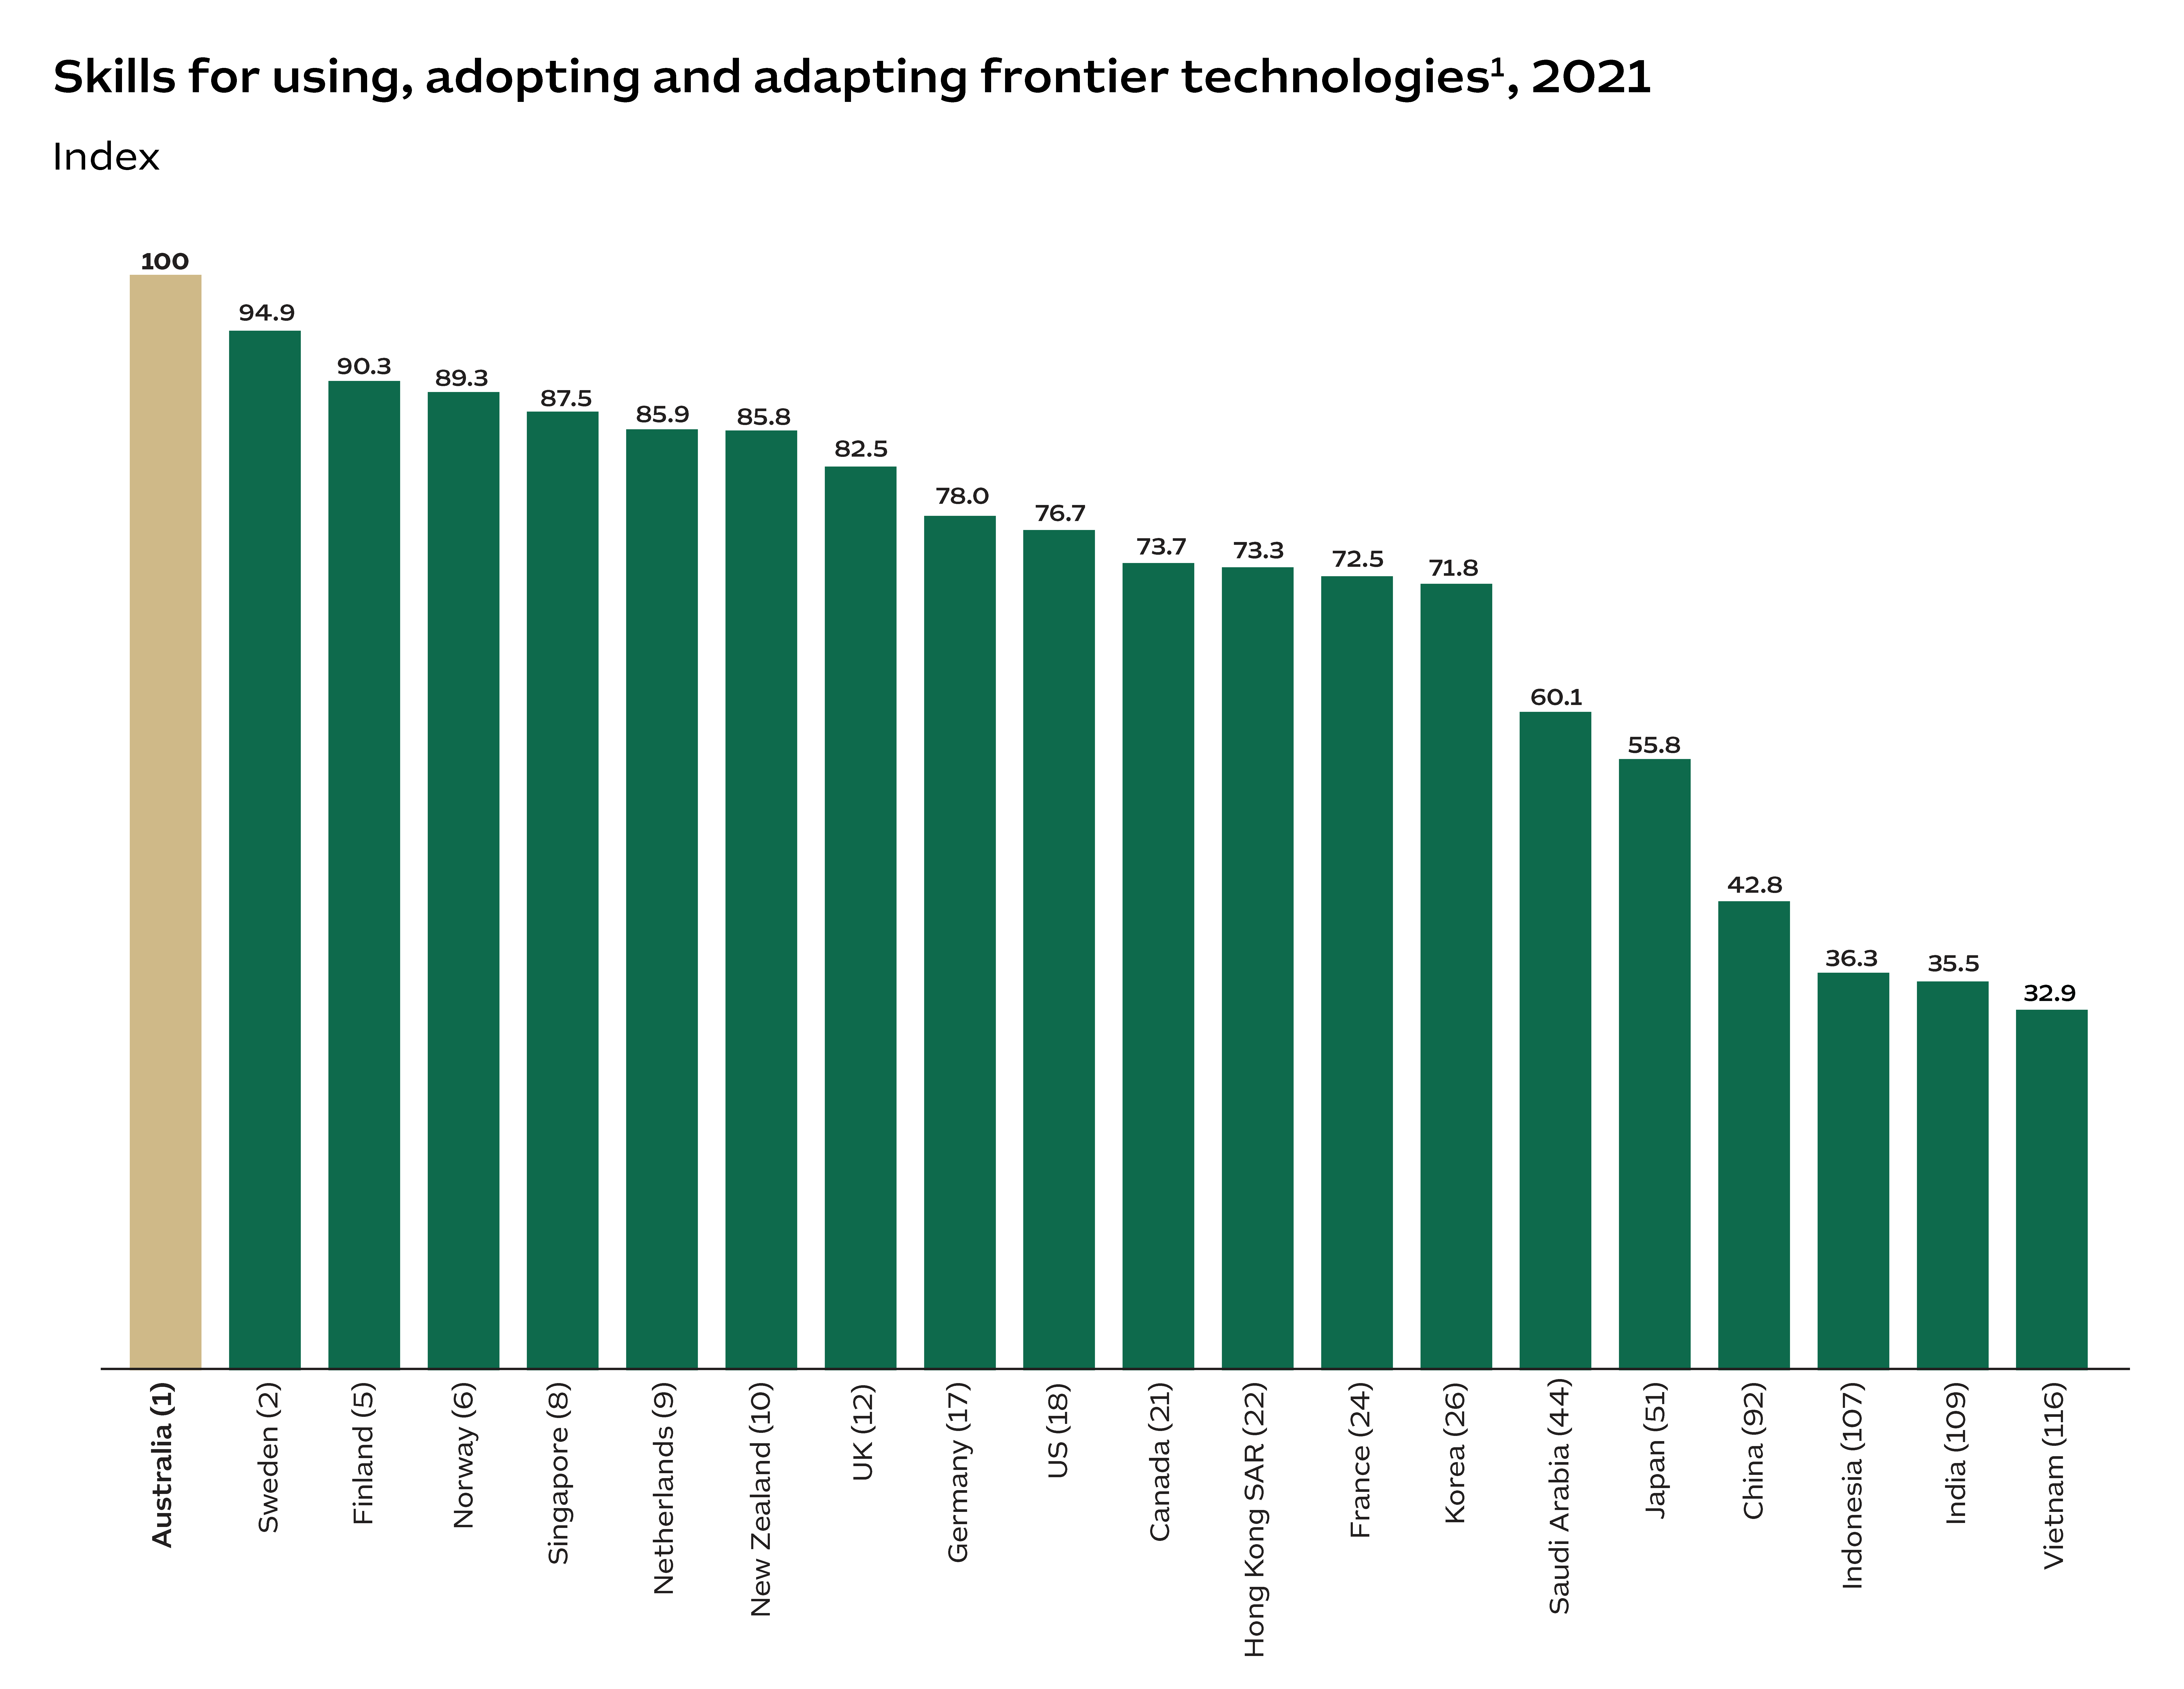 The bar chart shows an index measuring an economy (country)’s skills for using, adopting and adapting frontier technologies in 2021. The content behind the graph is: Australia (ranked #1) index value 100; Sweden (ranked #2) index value 95; Finland (ranked #5) index value 90; Norway (ranked #6) index value 89; Singapore (ranked #8) index value 88; Netherlands (ranked #9) index value 86; New Zealand (ranked #10) index value 86; UK (ranked #12) index value 83; Germany (ranked #17) index value 78; US (ranked #18) index value 77; Canada (ranked #21) index value 74; Hong Kong SAR (ranked #22) index value 73; France (ranked #24) index value 73; Korea (ranked #26) index value 72; Saudi Arabia (ranked #44) index value 60; Japan (ranked #51) index value 56; China (ranked #92) index value 43; Indonesia (ranked #107) index value 36; India (ranked #109) index value 36; and Vietnam (ranked #116) index value 33.